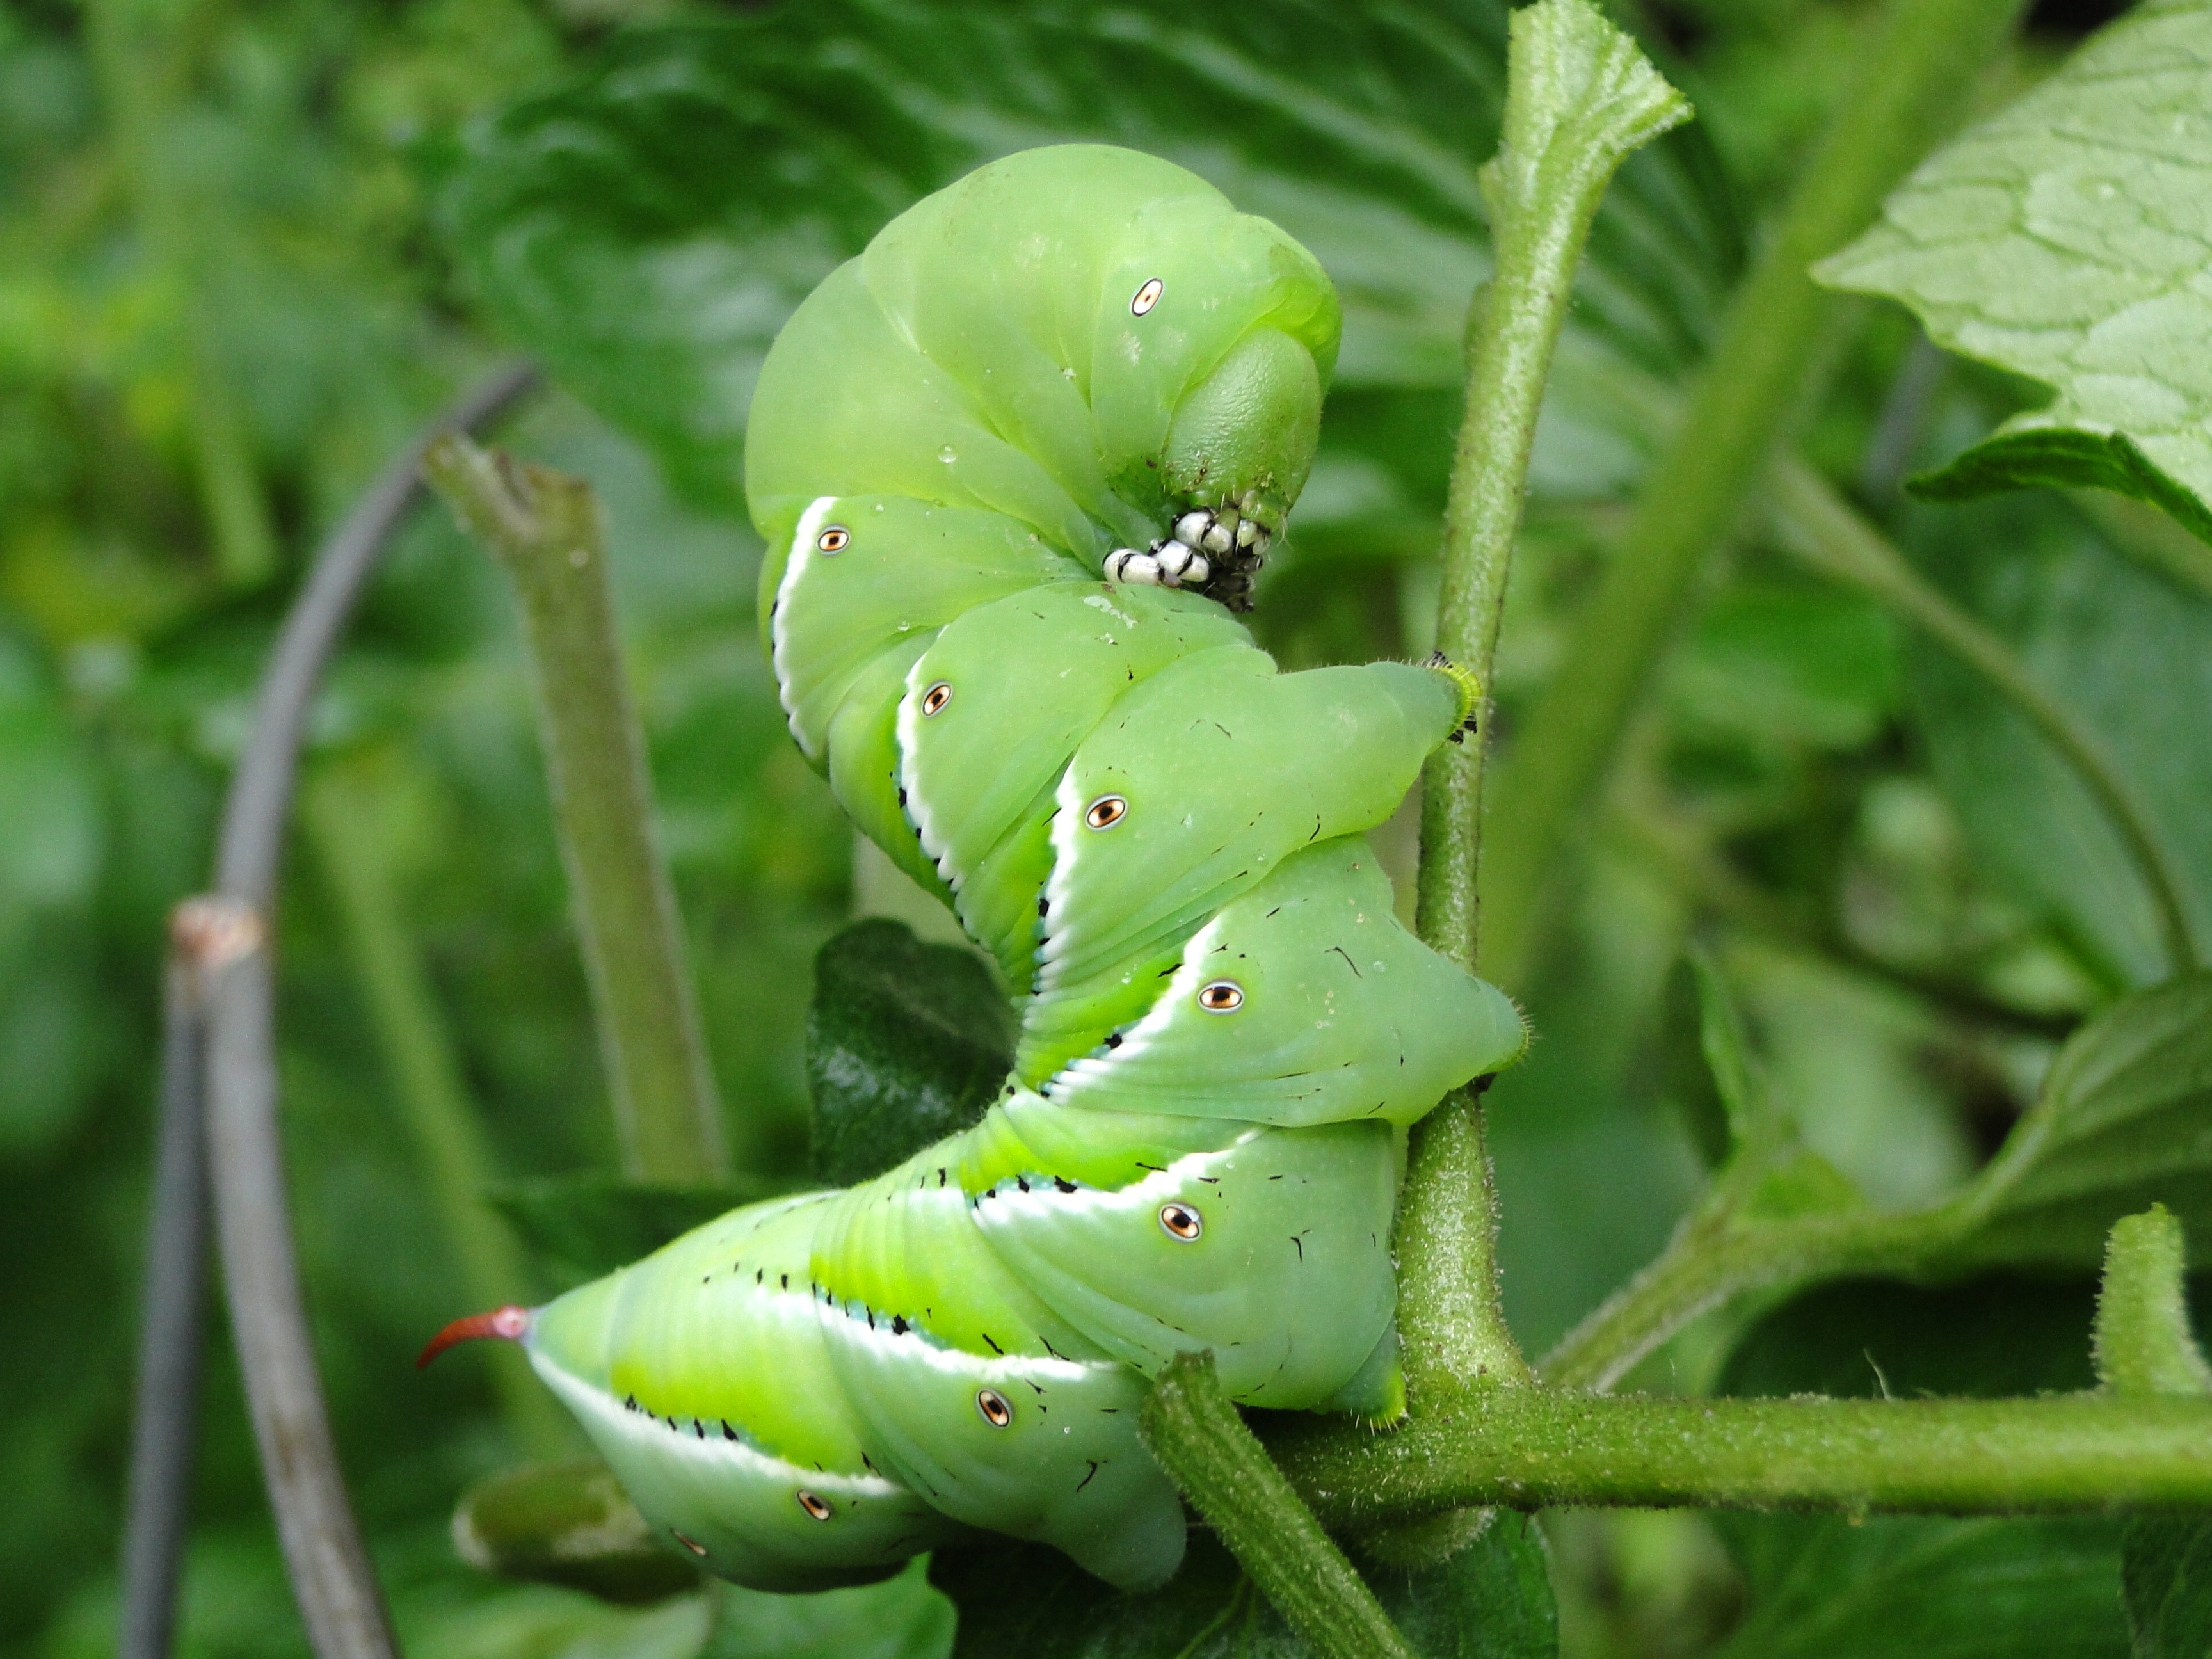 Royalty-Free photo: Worm, tomato hornworm, tomato worm, fat, green, worms